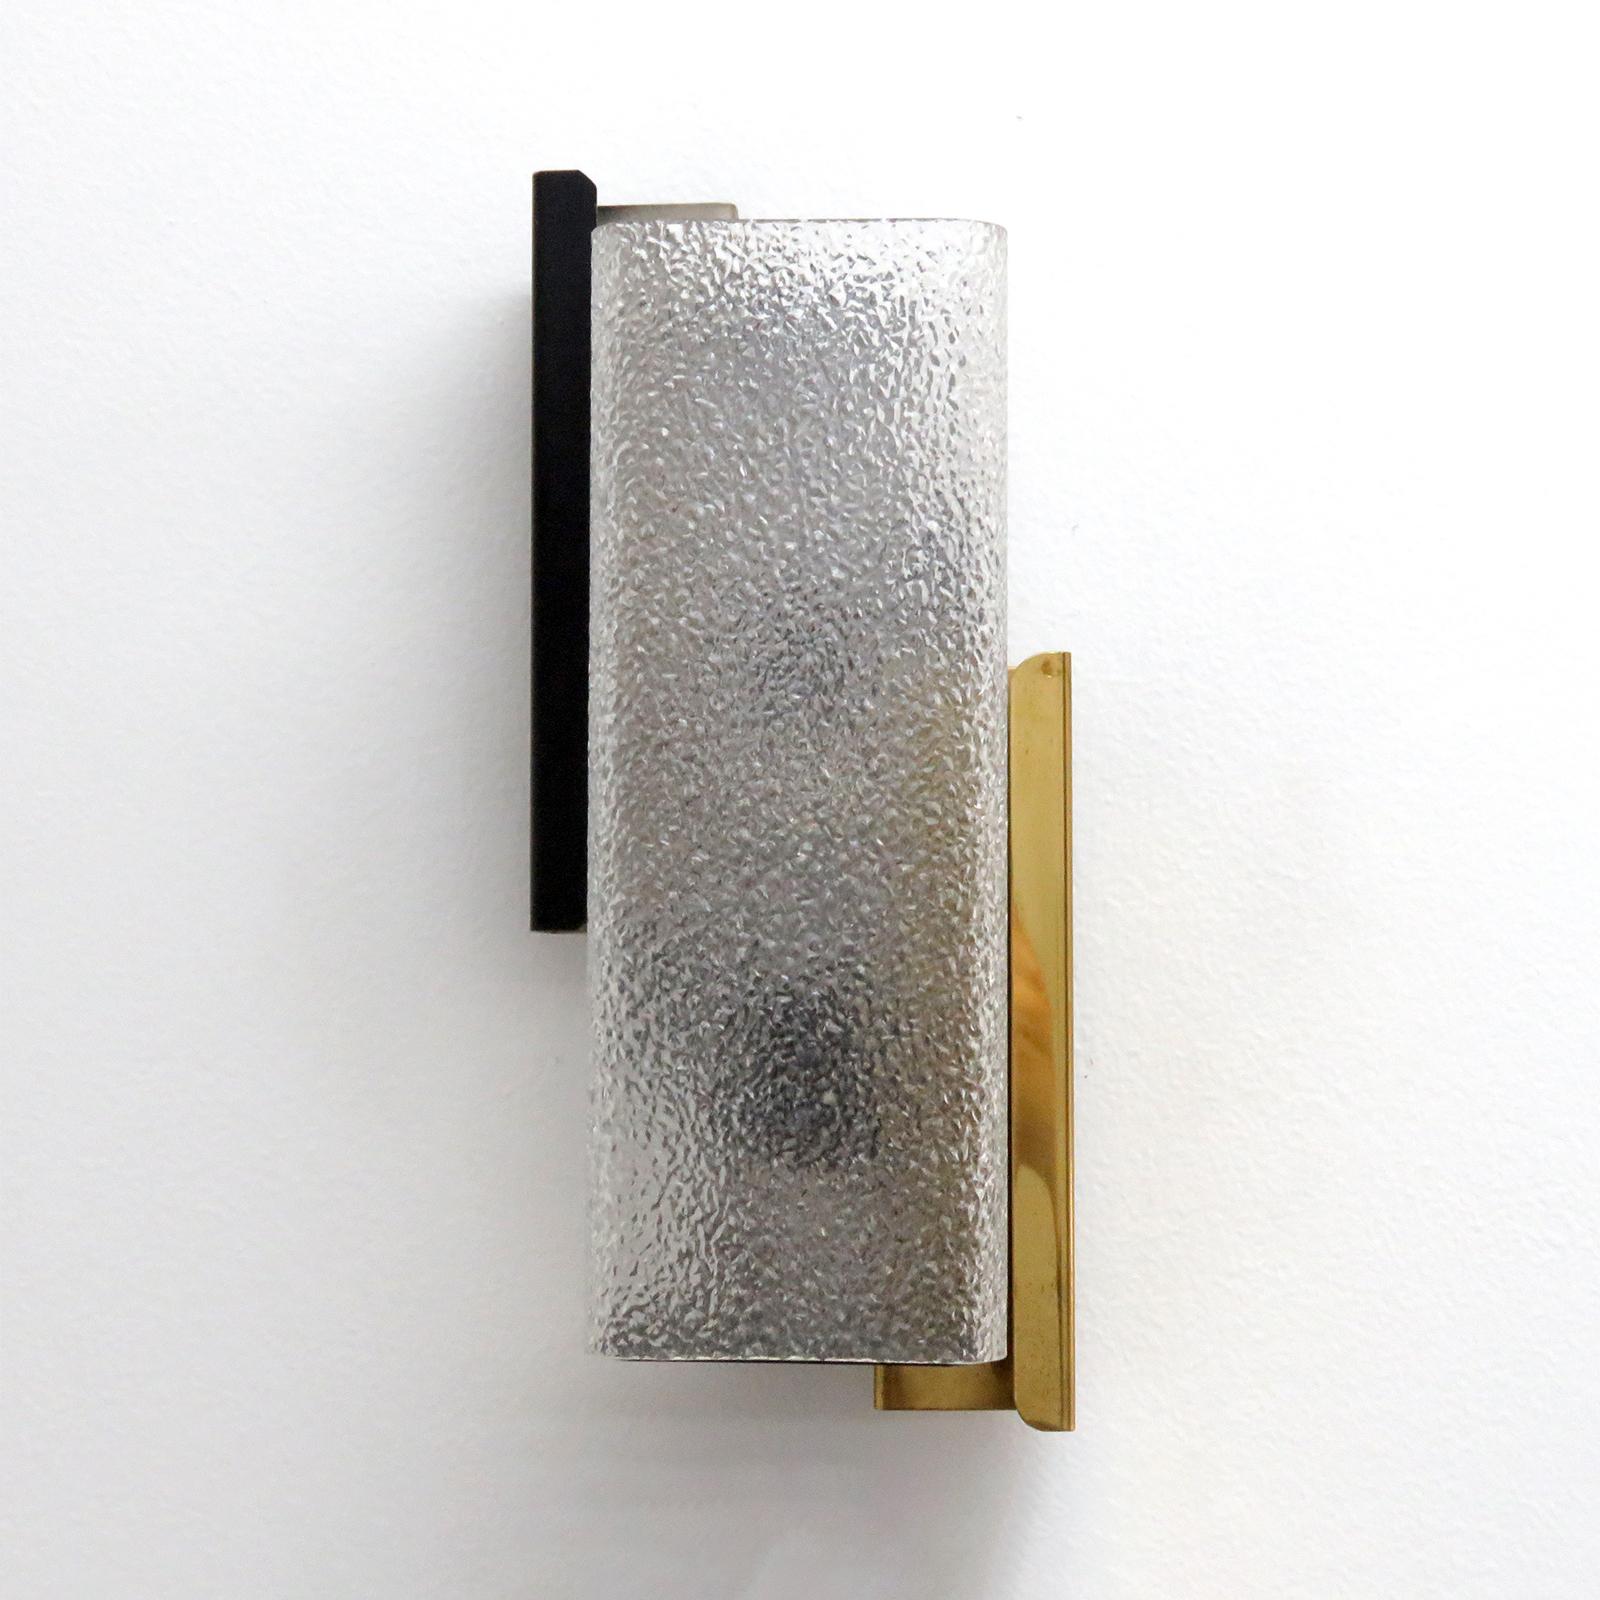 Elegant French wall light by Arlus, in brass, enameled metal and textured Lucite.